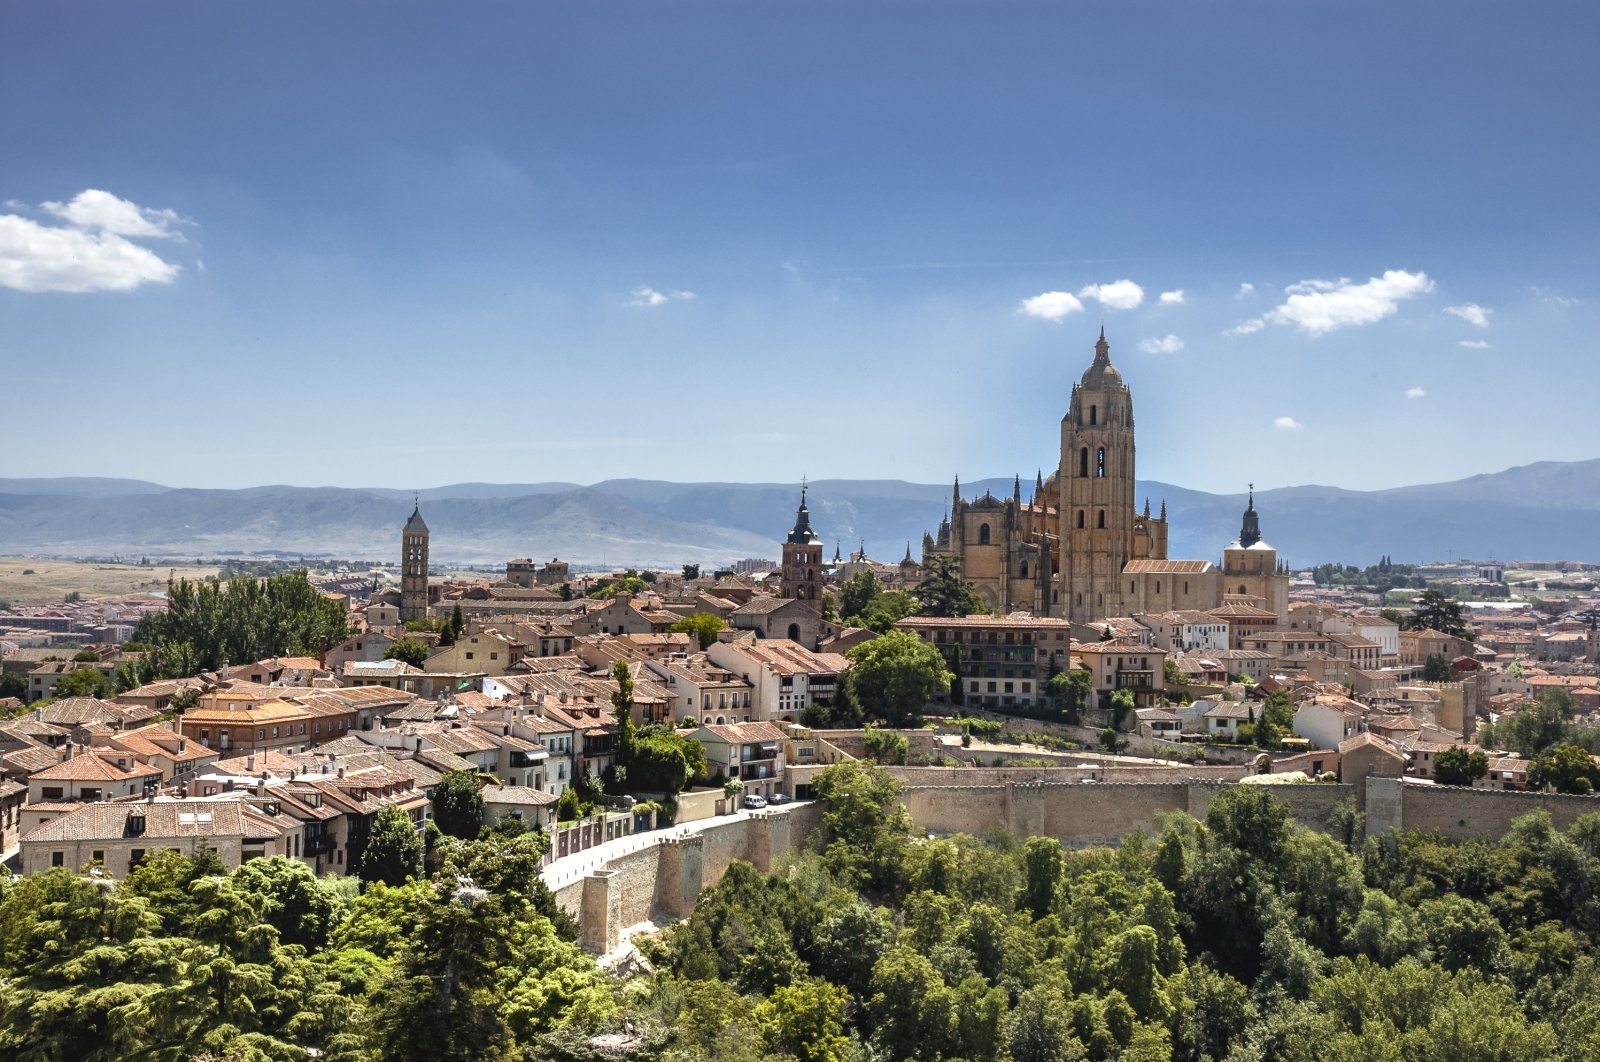 View of the city of Segovia from the Tower of Juan II del Alcazar, as the imposing silhouette of the Gothic cathedral of Santa Maria stands out, Segovia, Spain, June 25, 2021. (Getty Images Photo)